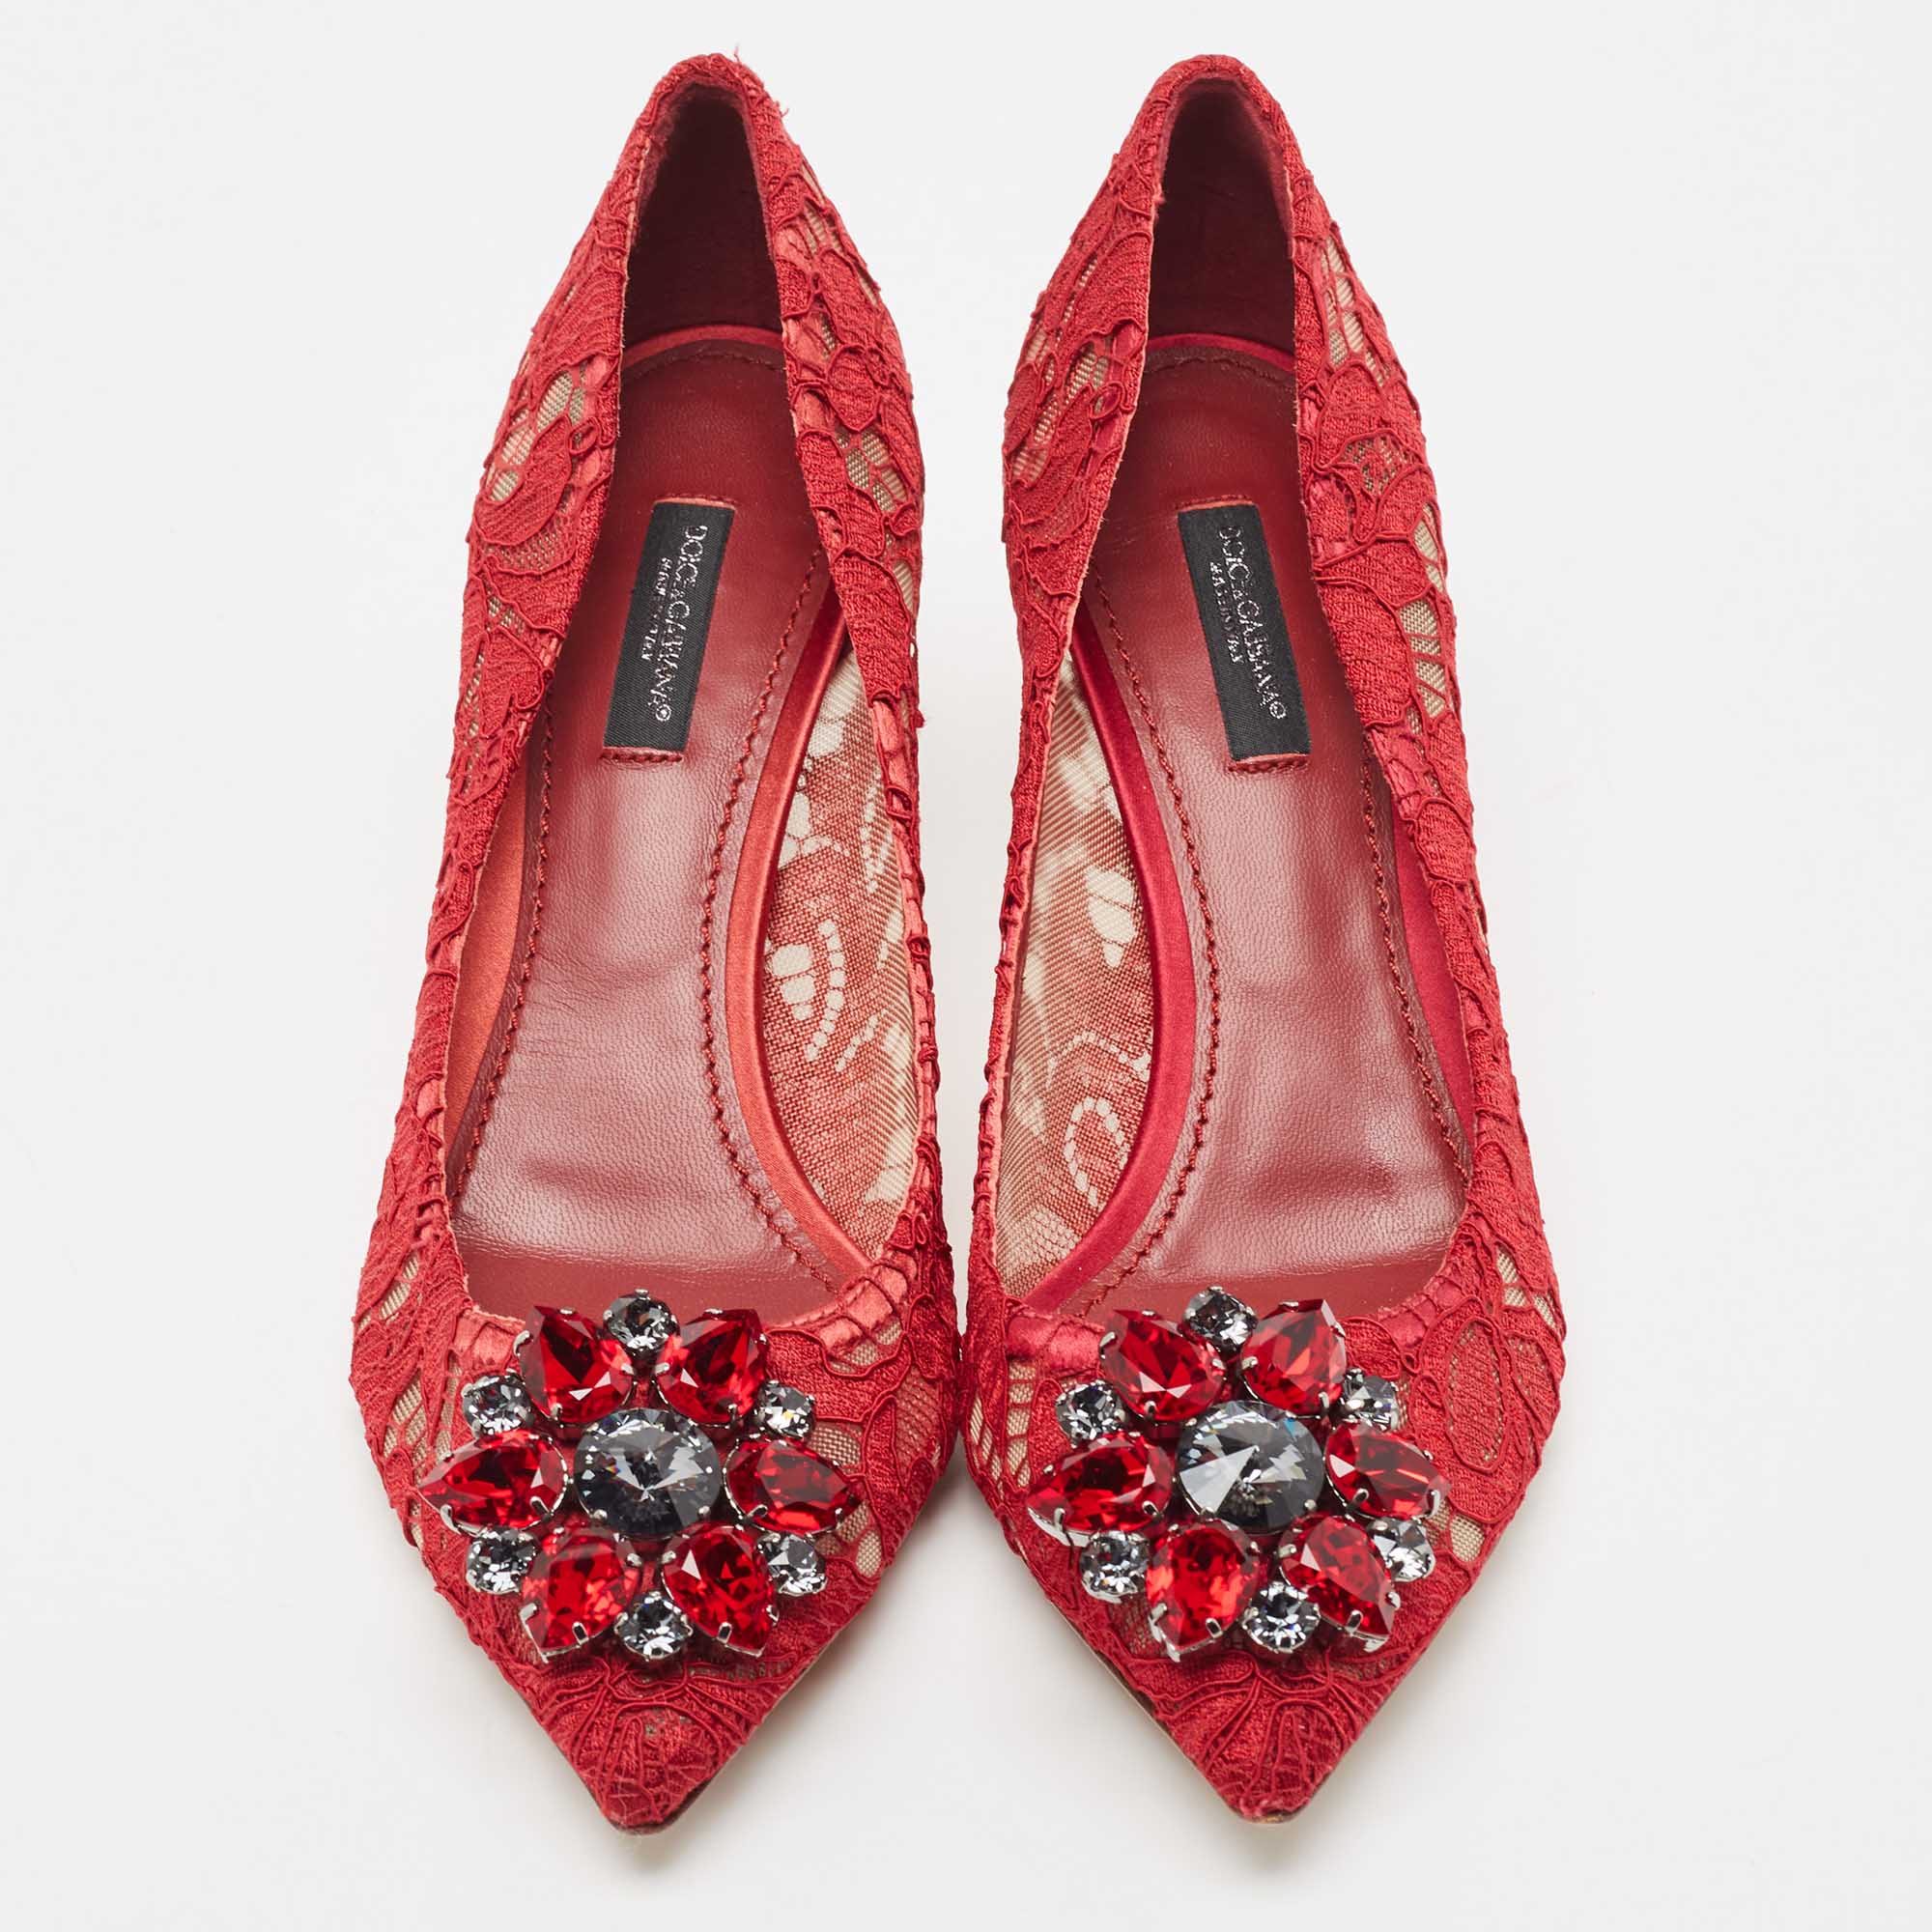 Dolce & Gabbana Red Mesh And Lace Crystal Embellished Belluci Pumps Size 37.5